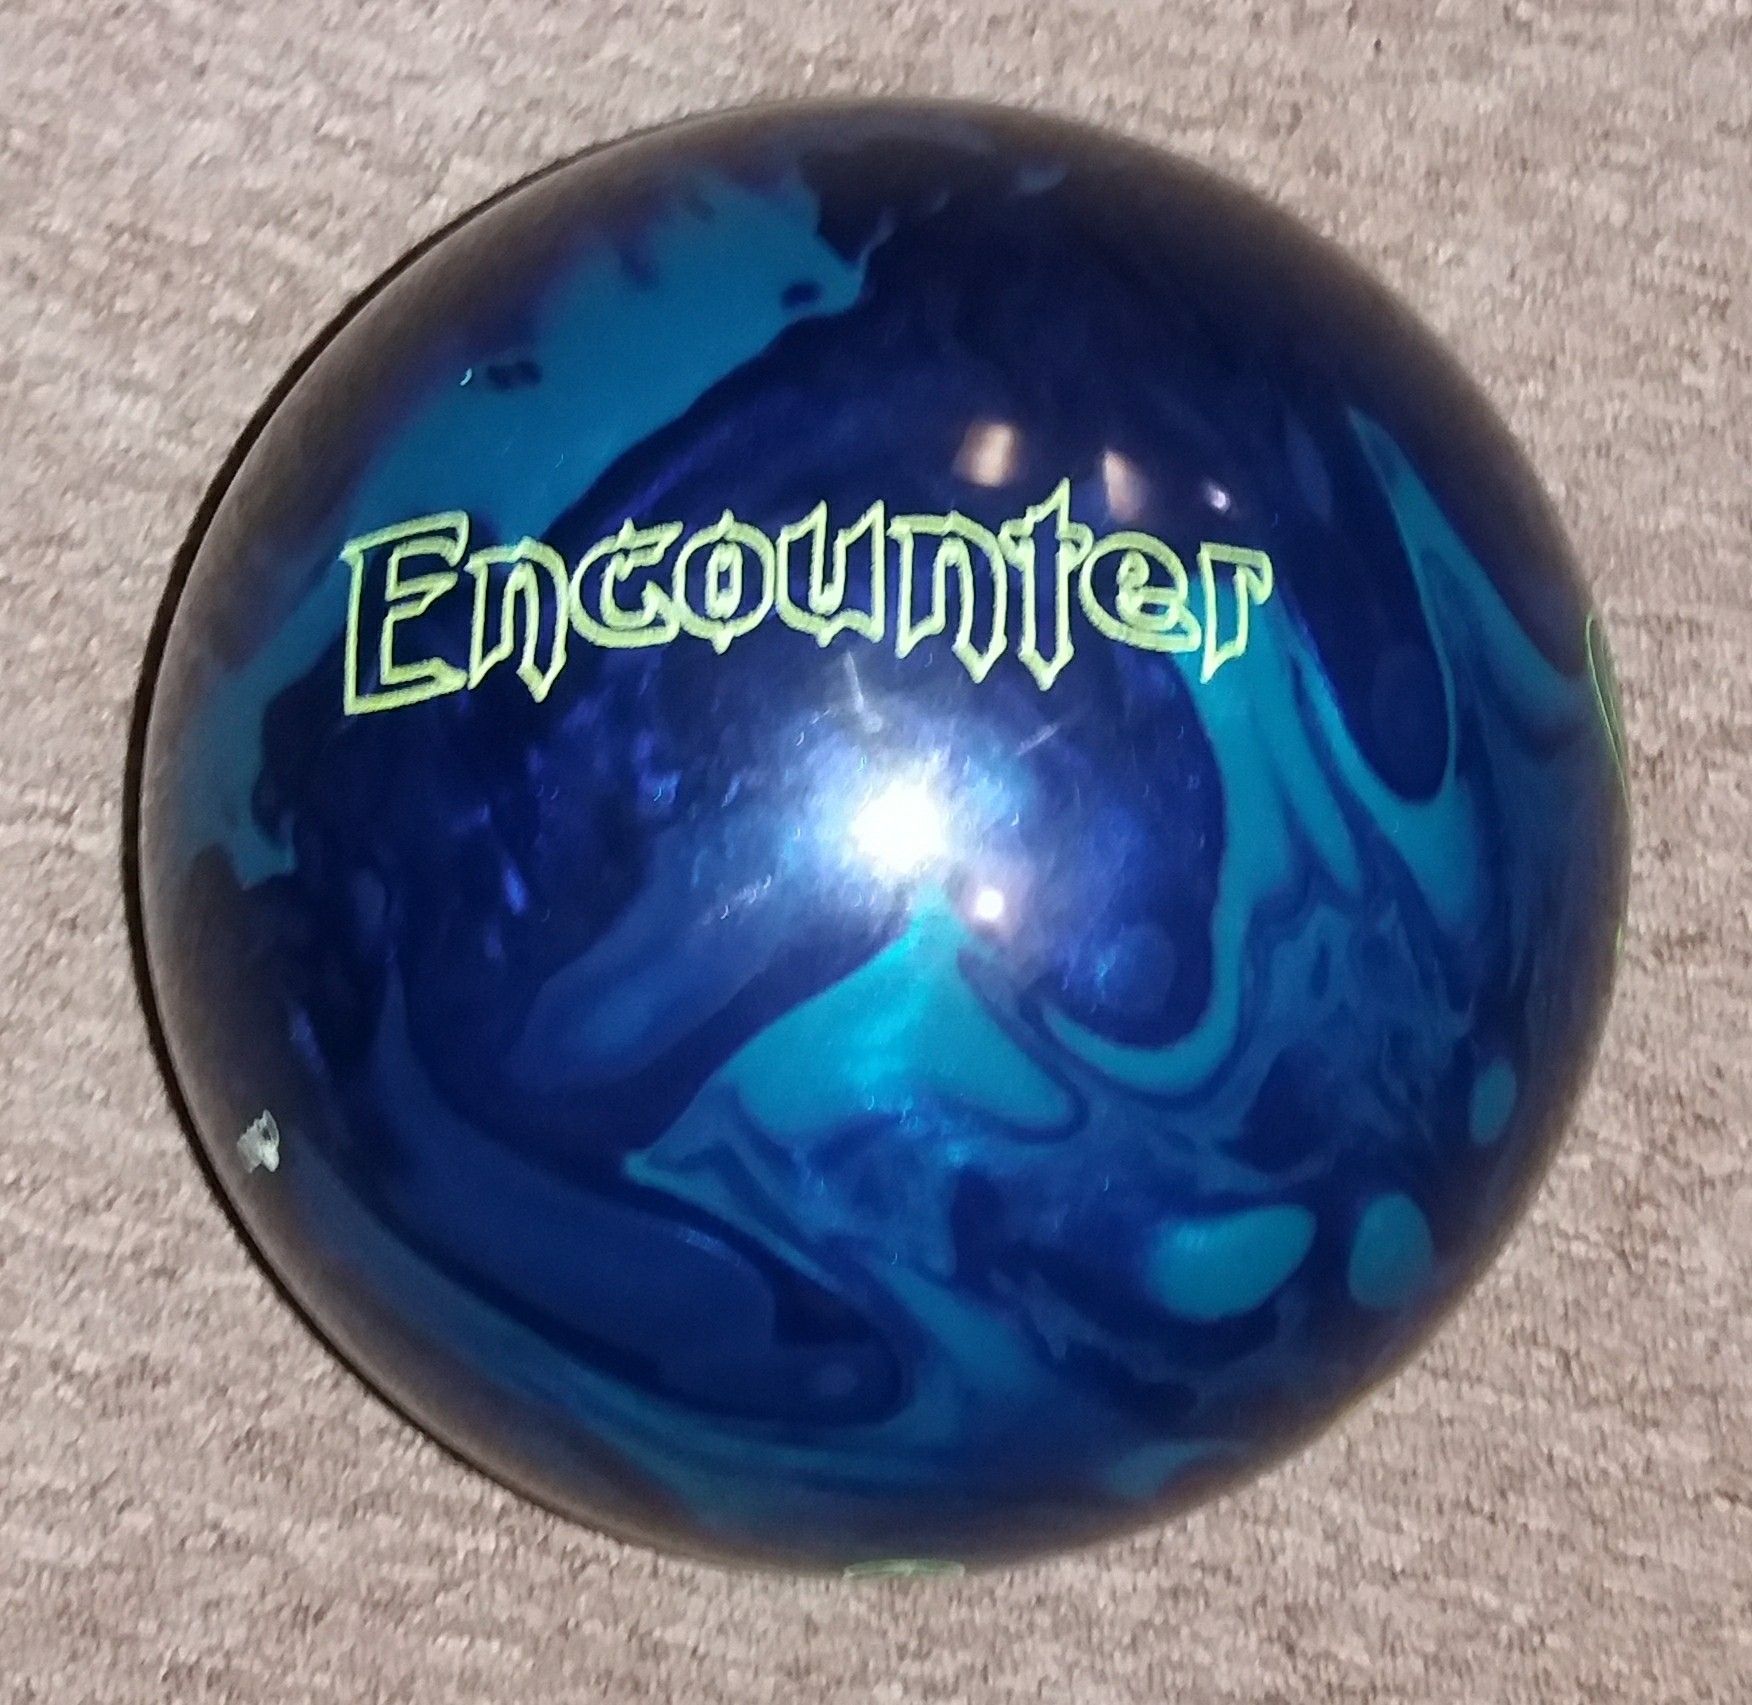 Columbia 300 Encounter (undrilled)